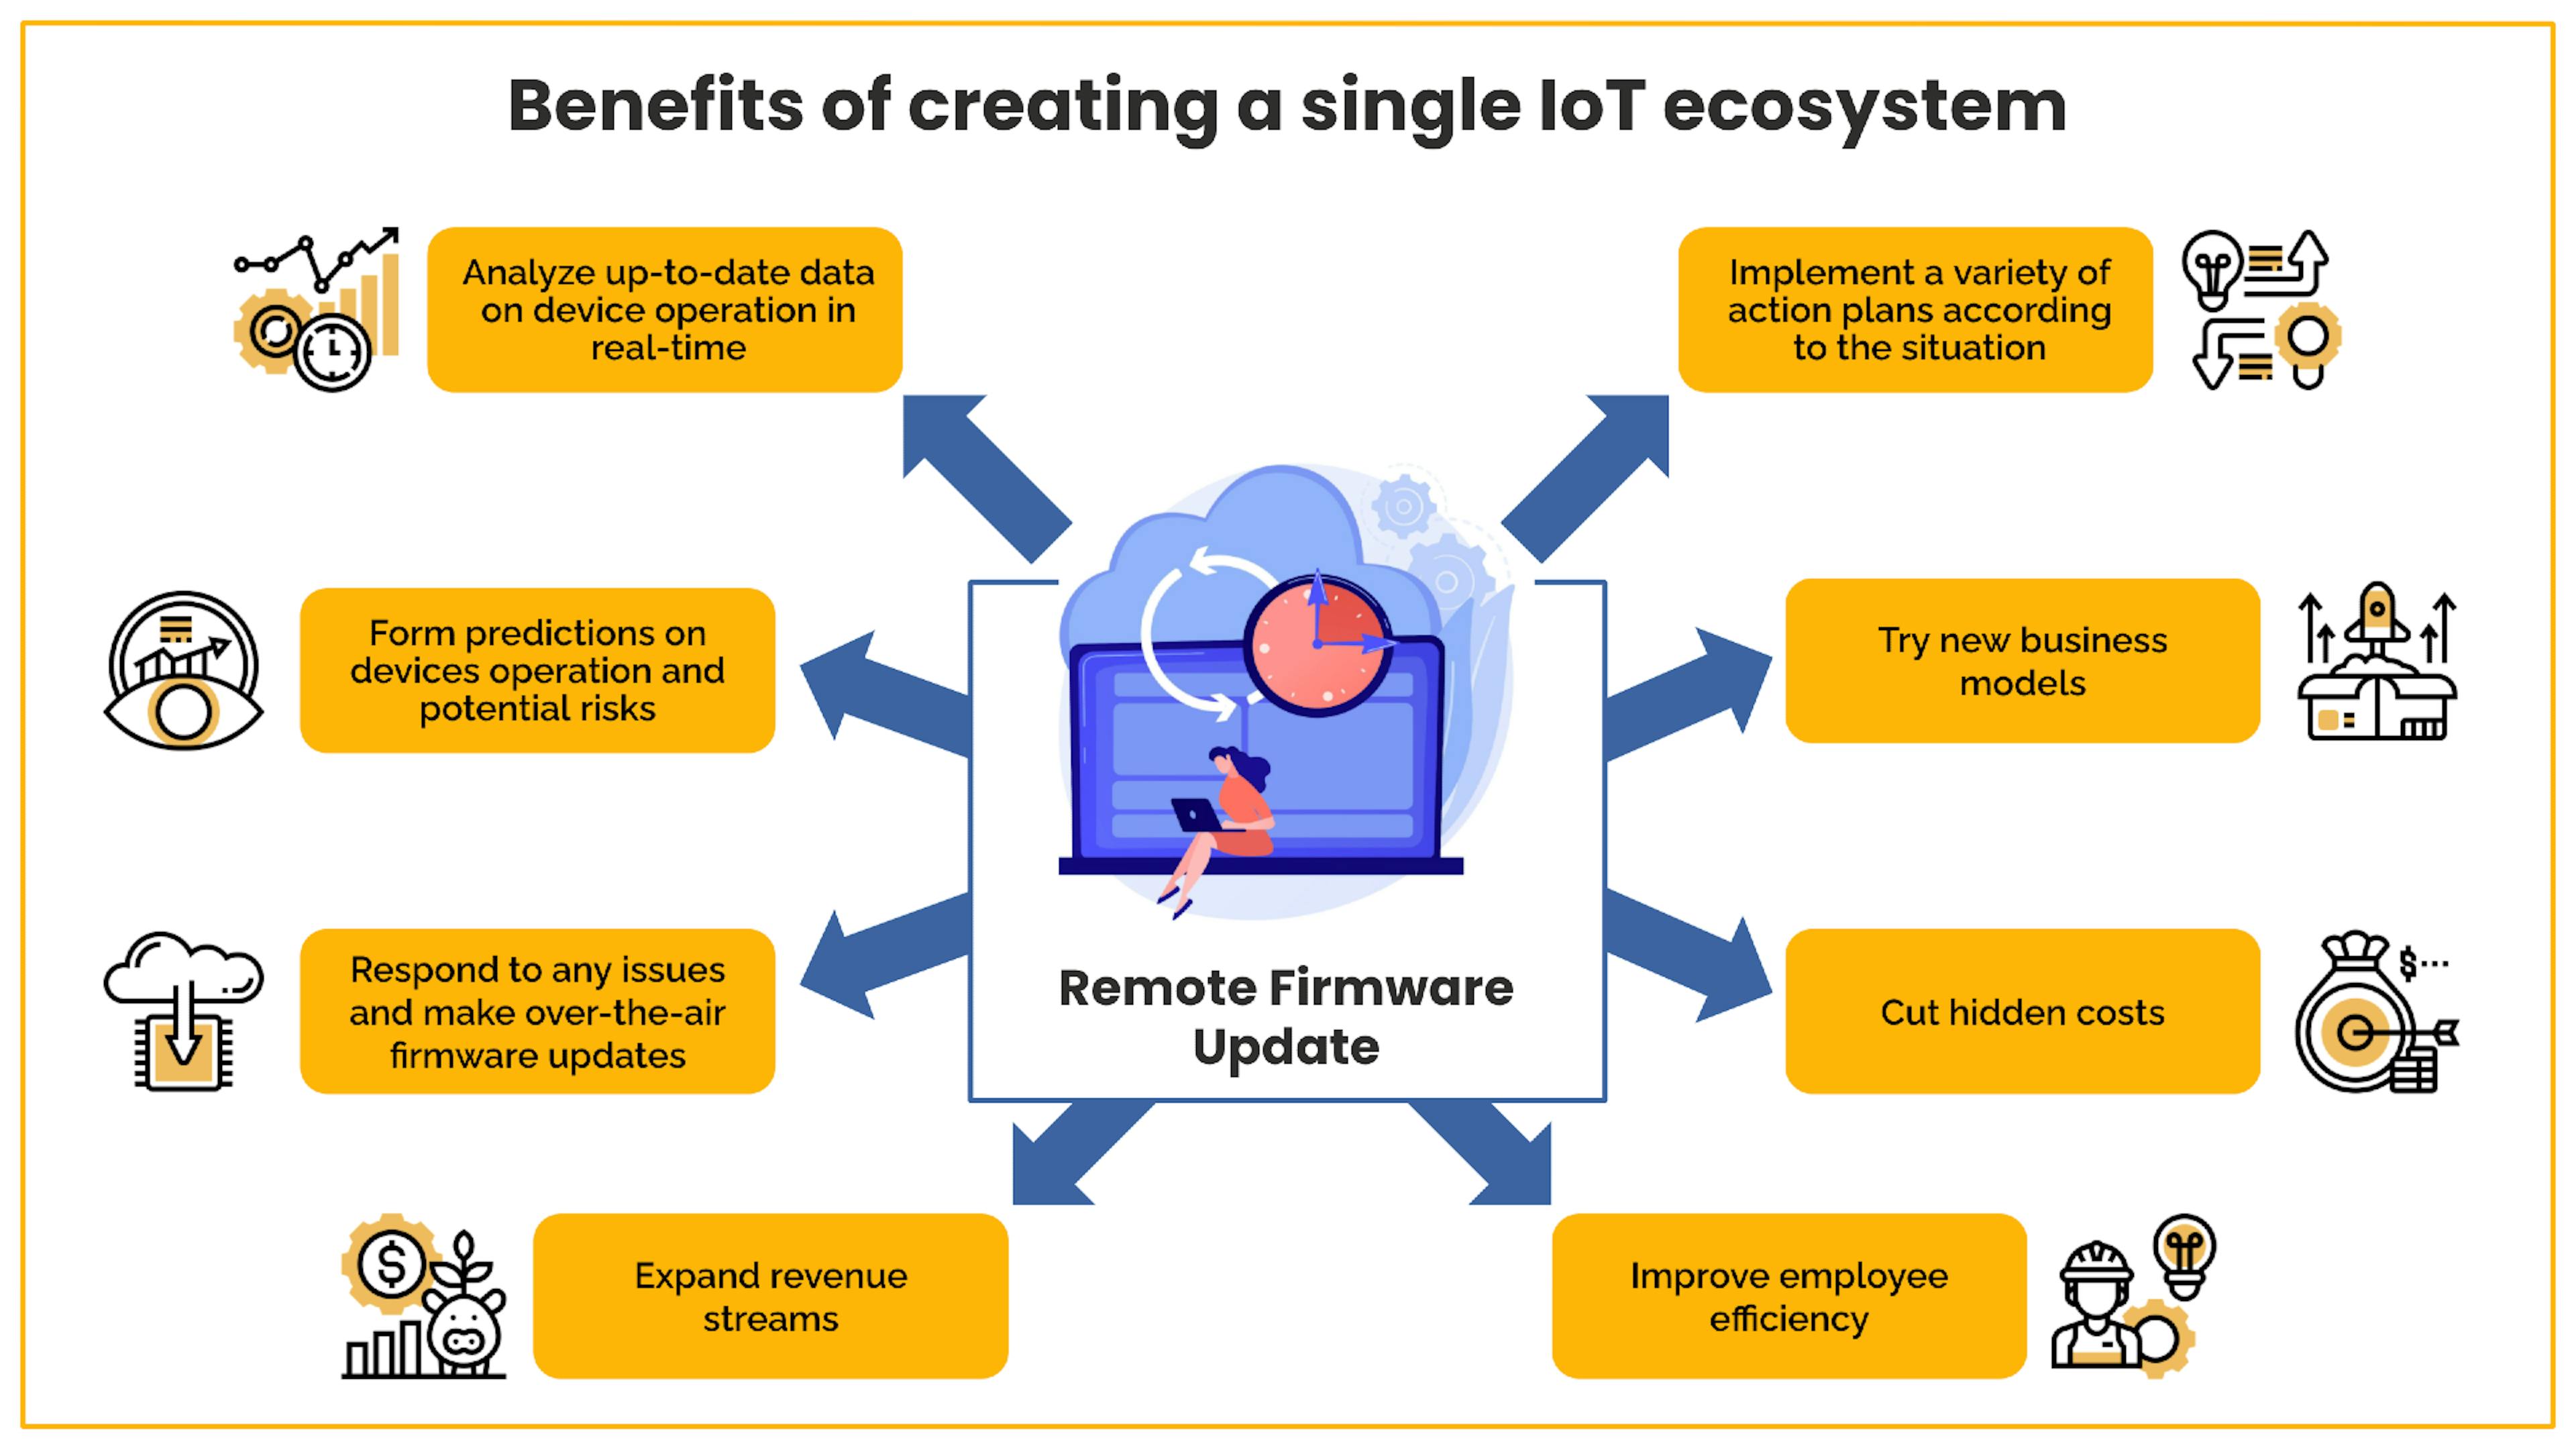 Benefits of creating a single IoT ecosystem